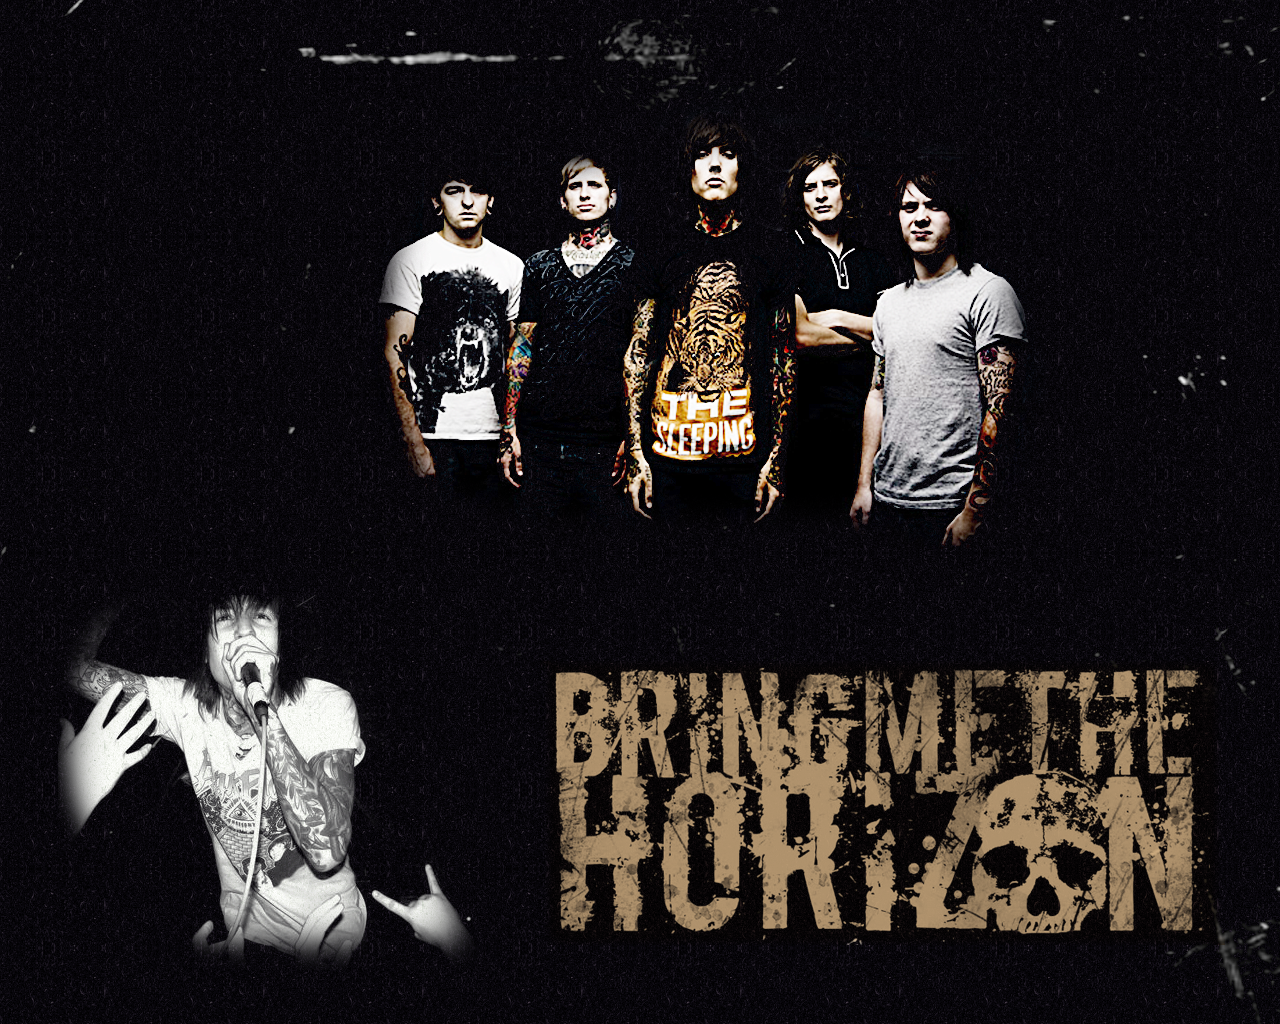 Bring Me The Horizon Wallpaper All About Music